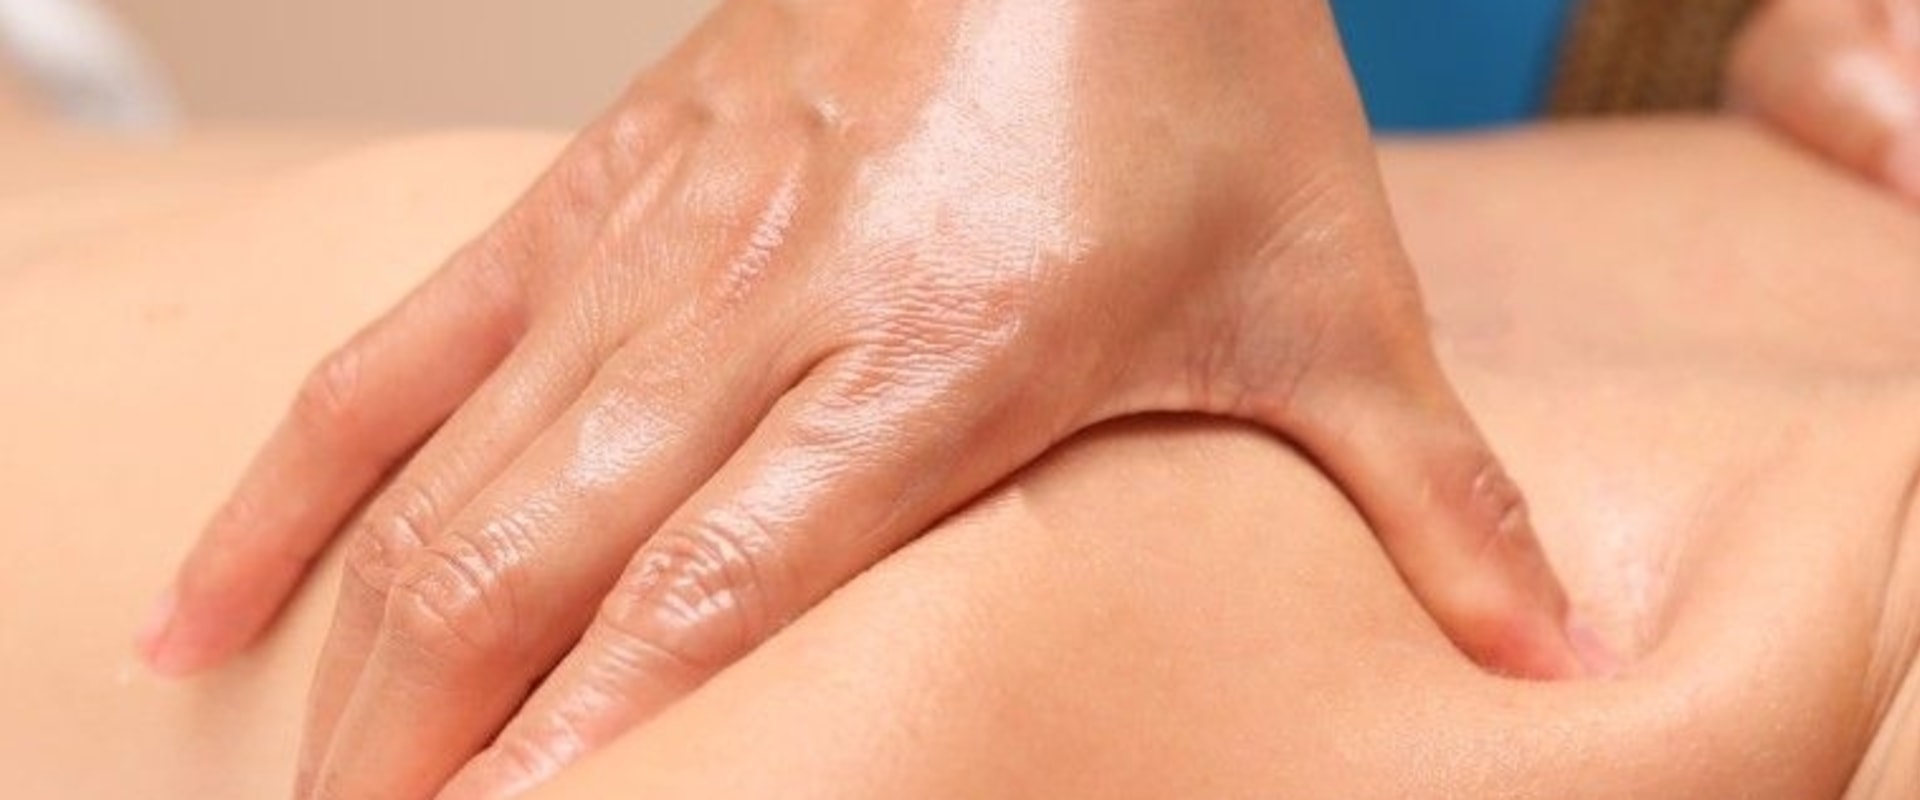 Swedish Massage vs. Deep Tissue Massage: Which is Best for You?